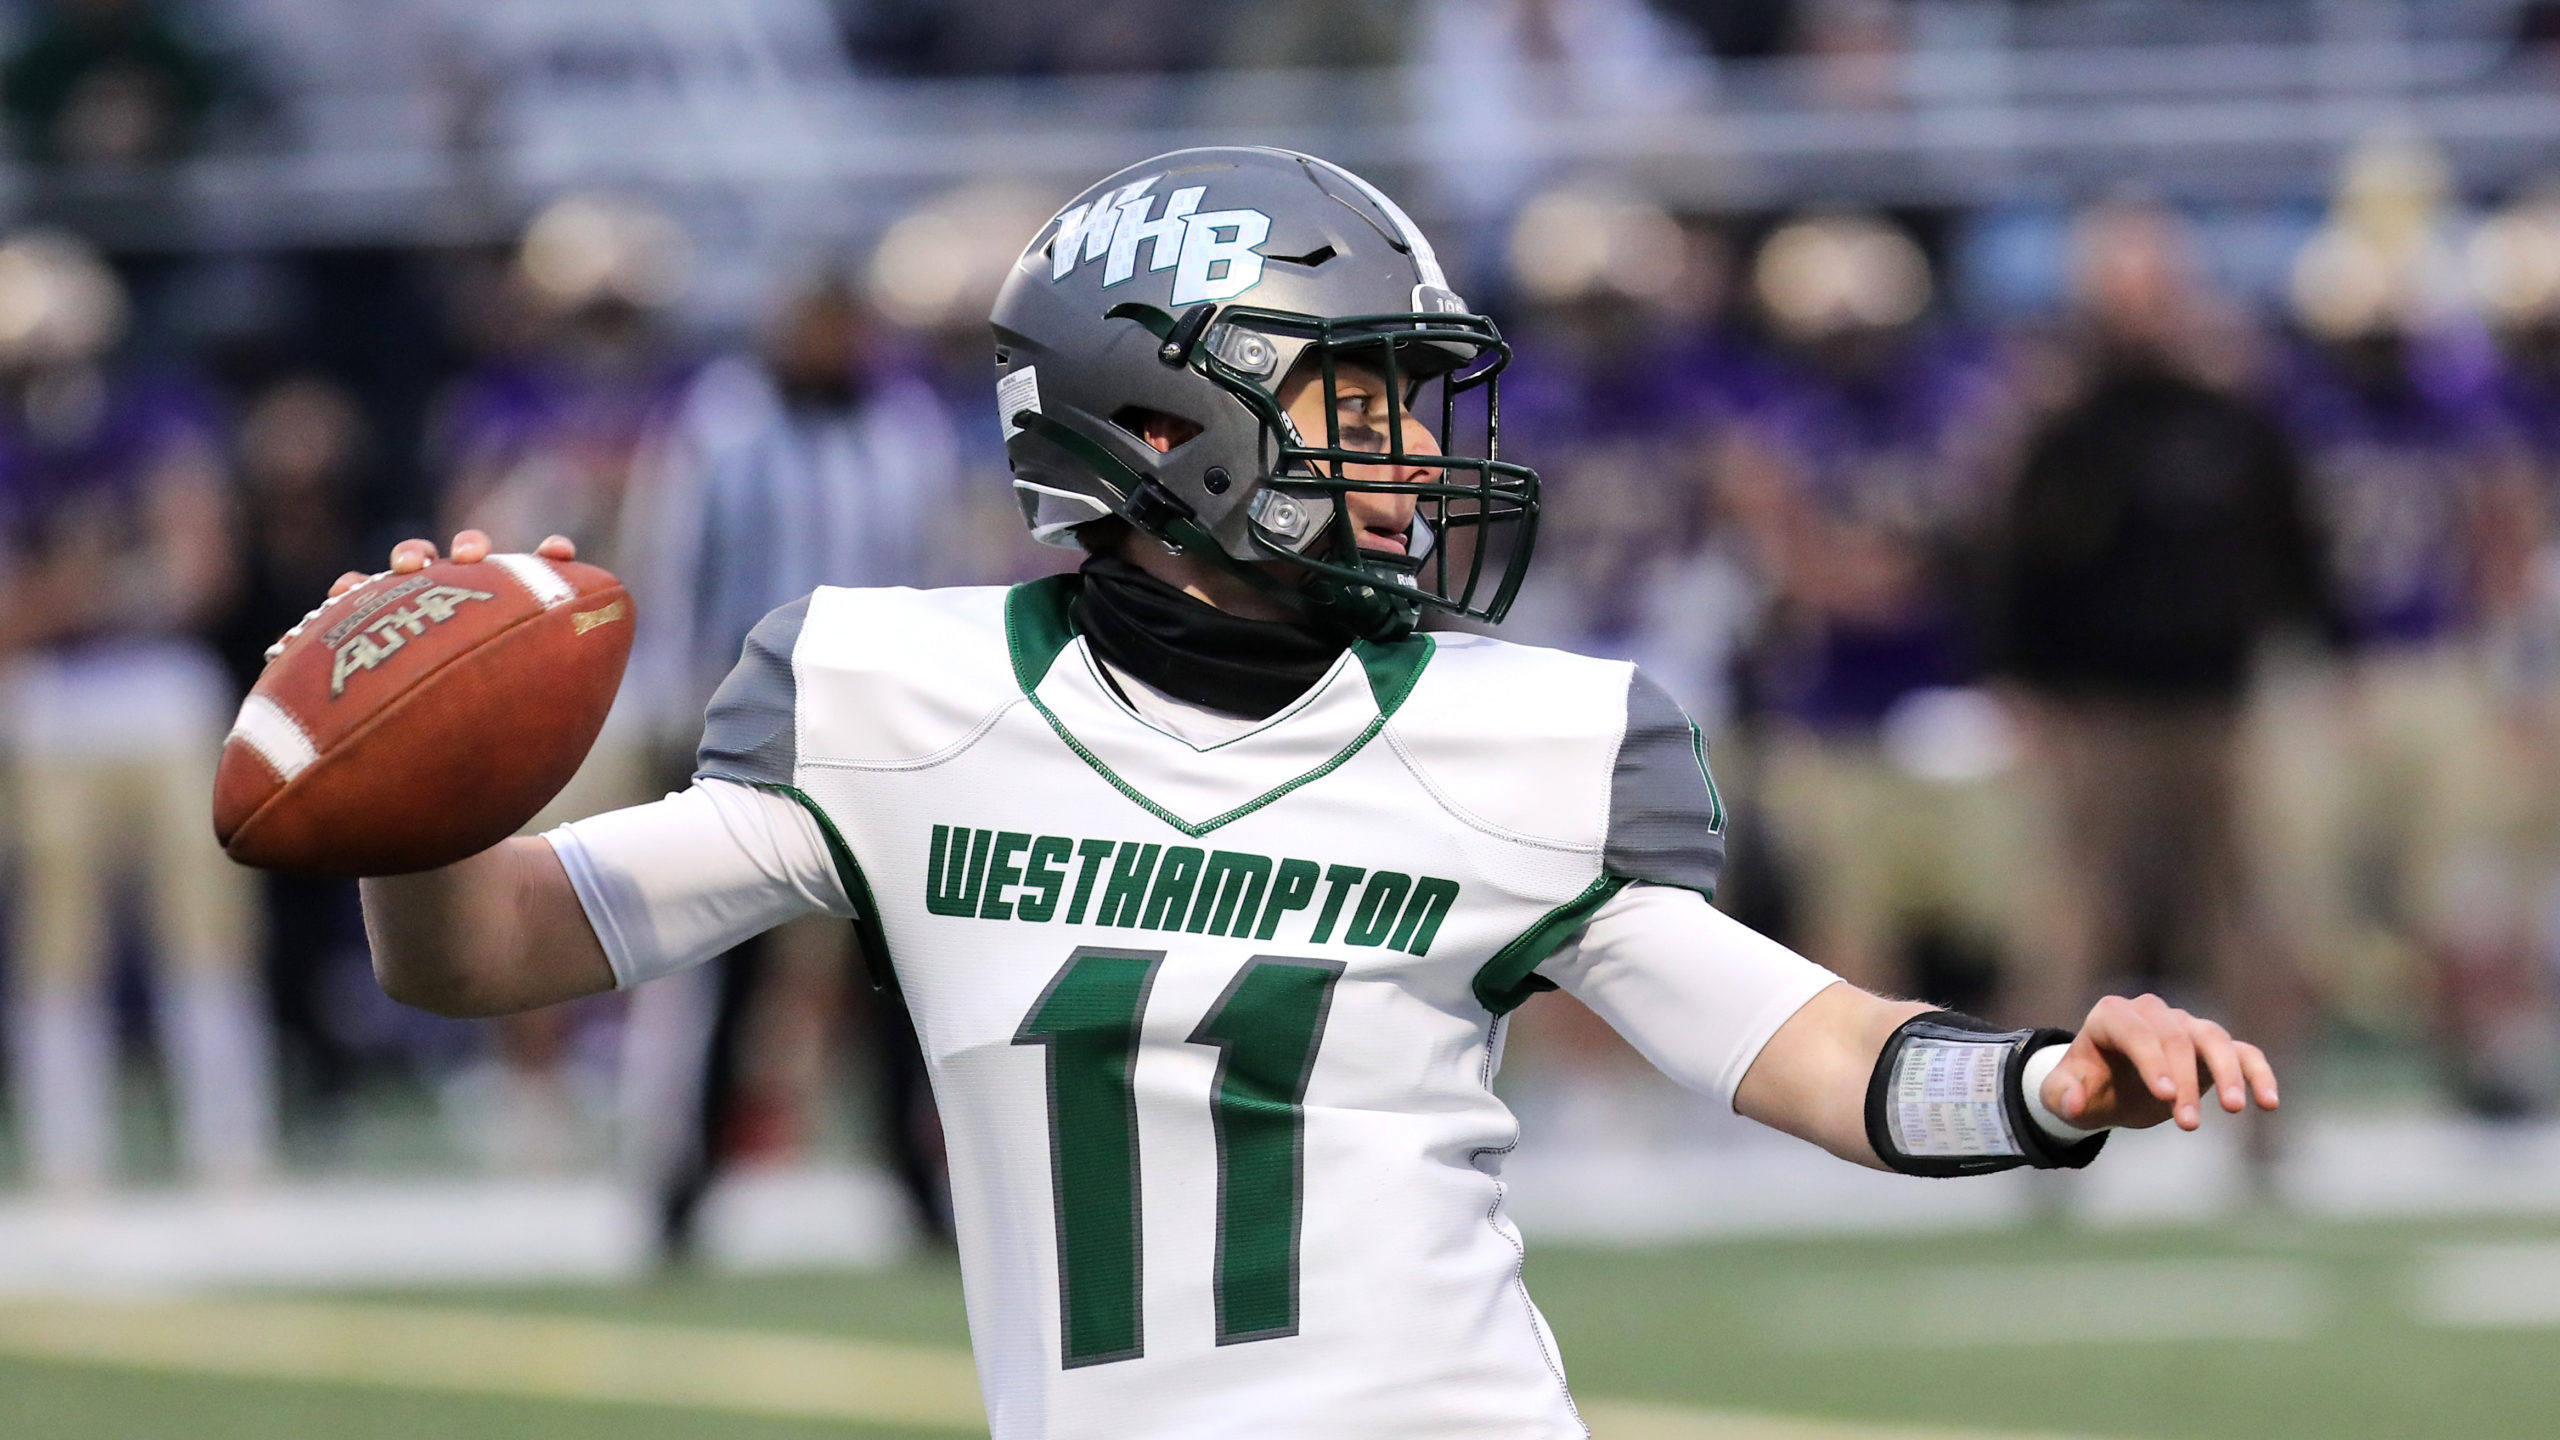 Westhampton Beach quarterback Christian Capuano finished 8 for 17 with 202 yards and two touchdowns.